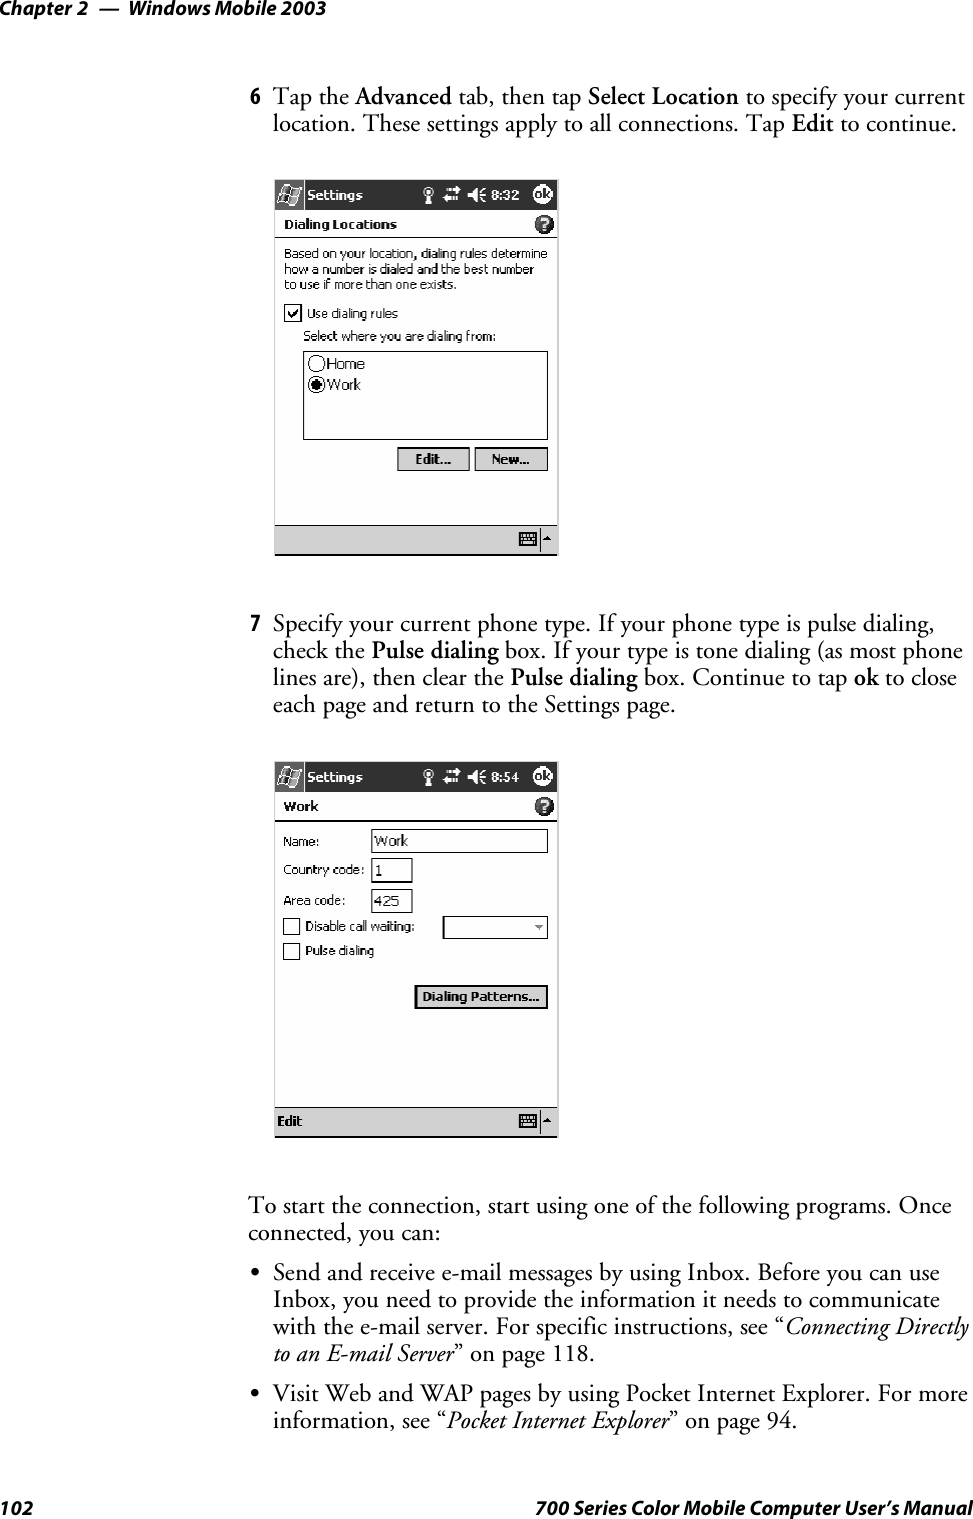 Windows Mobile 2003Chapter —2102 700 Series Color Mobile Computer User’s Manual6Tap the Advanced tab, then tap Select Location to specify your currentlocation. These settings apply to all connections. Tap Edit to continue.7Specify your current phone type. If your phone type is pulse dialing,check the Pulse dialing box. If your type is tone dialing (as most phonelines are), then clear the Pulse dialing box. Continue to tap ok to closeeach page and return to the Settings page.To start the connection, start using one of the following programs. Onceconnected, you can:SSend and receive e-mail messages by using Inbox. Before you can useInbox, you need to provide the information it needs to communicatewith the e-mail server. For specific instructions, see “Connecting Directlyto an E-mail Server” on page 118.SVisit Web and WAP pages by using Pocket Internet Explorer. For moreinformation, see “Pocket Internet Explorer” on page 94.